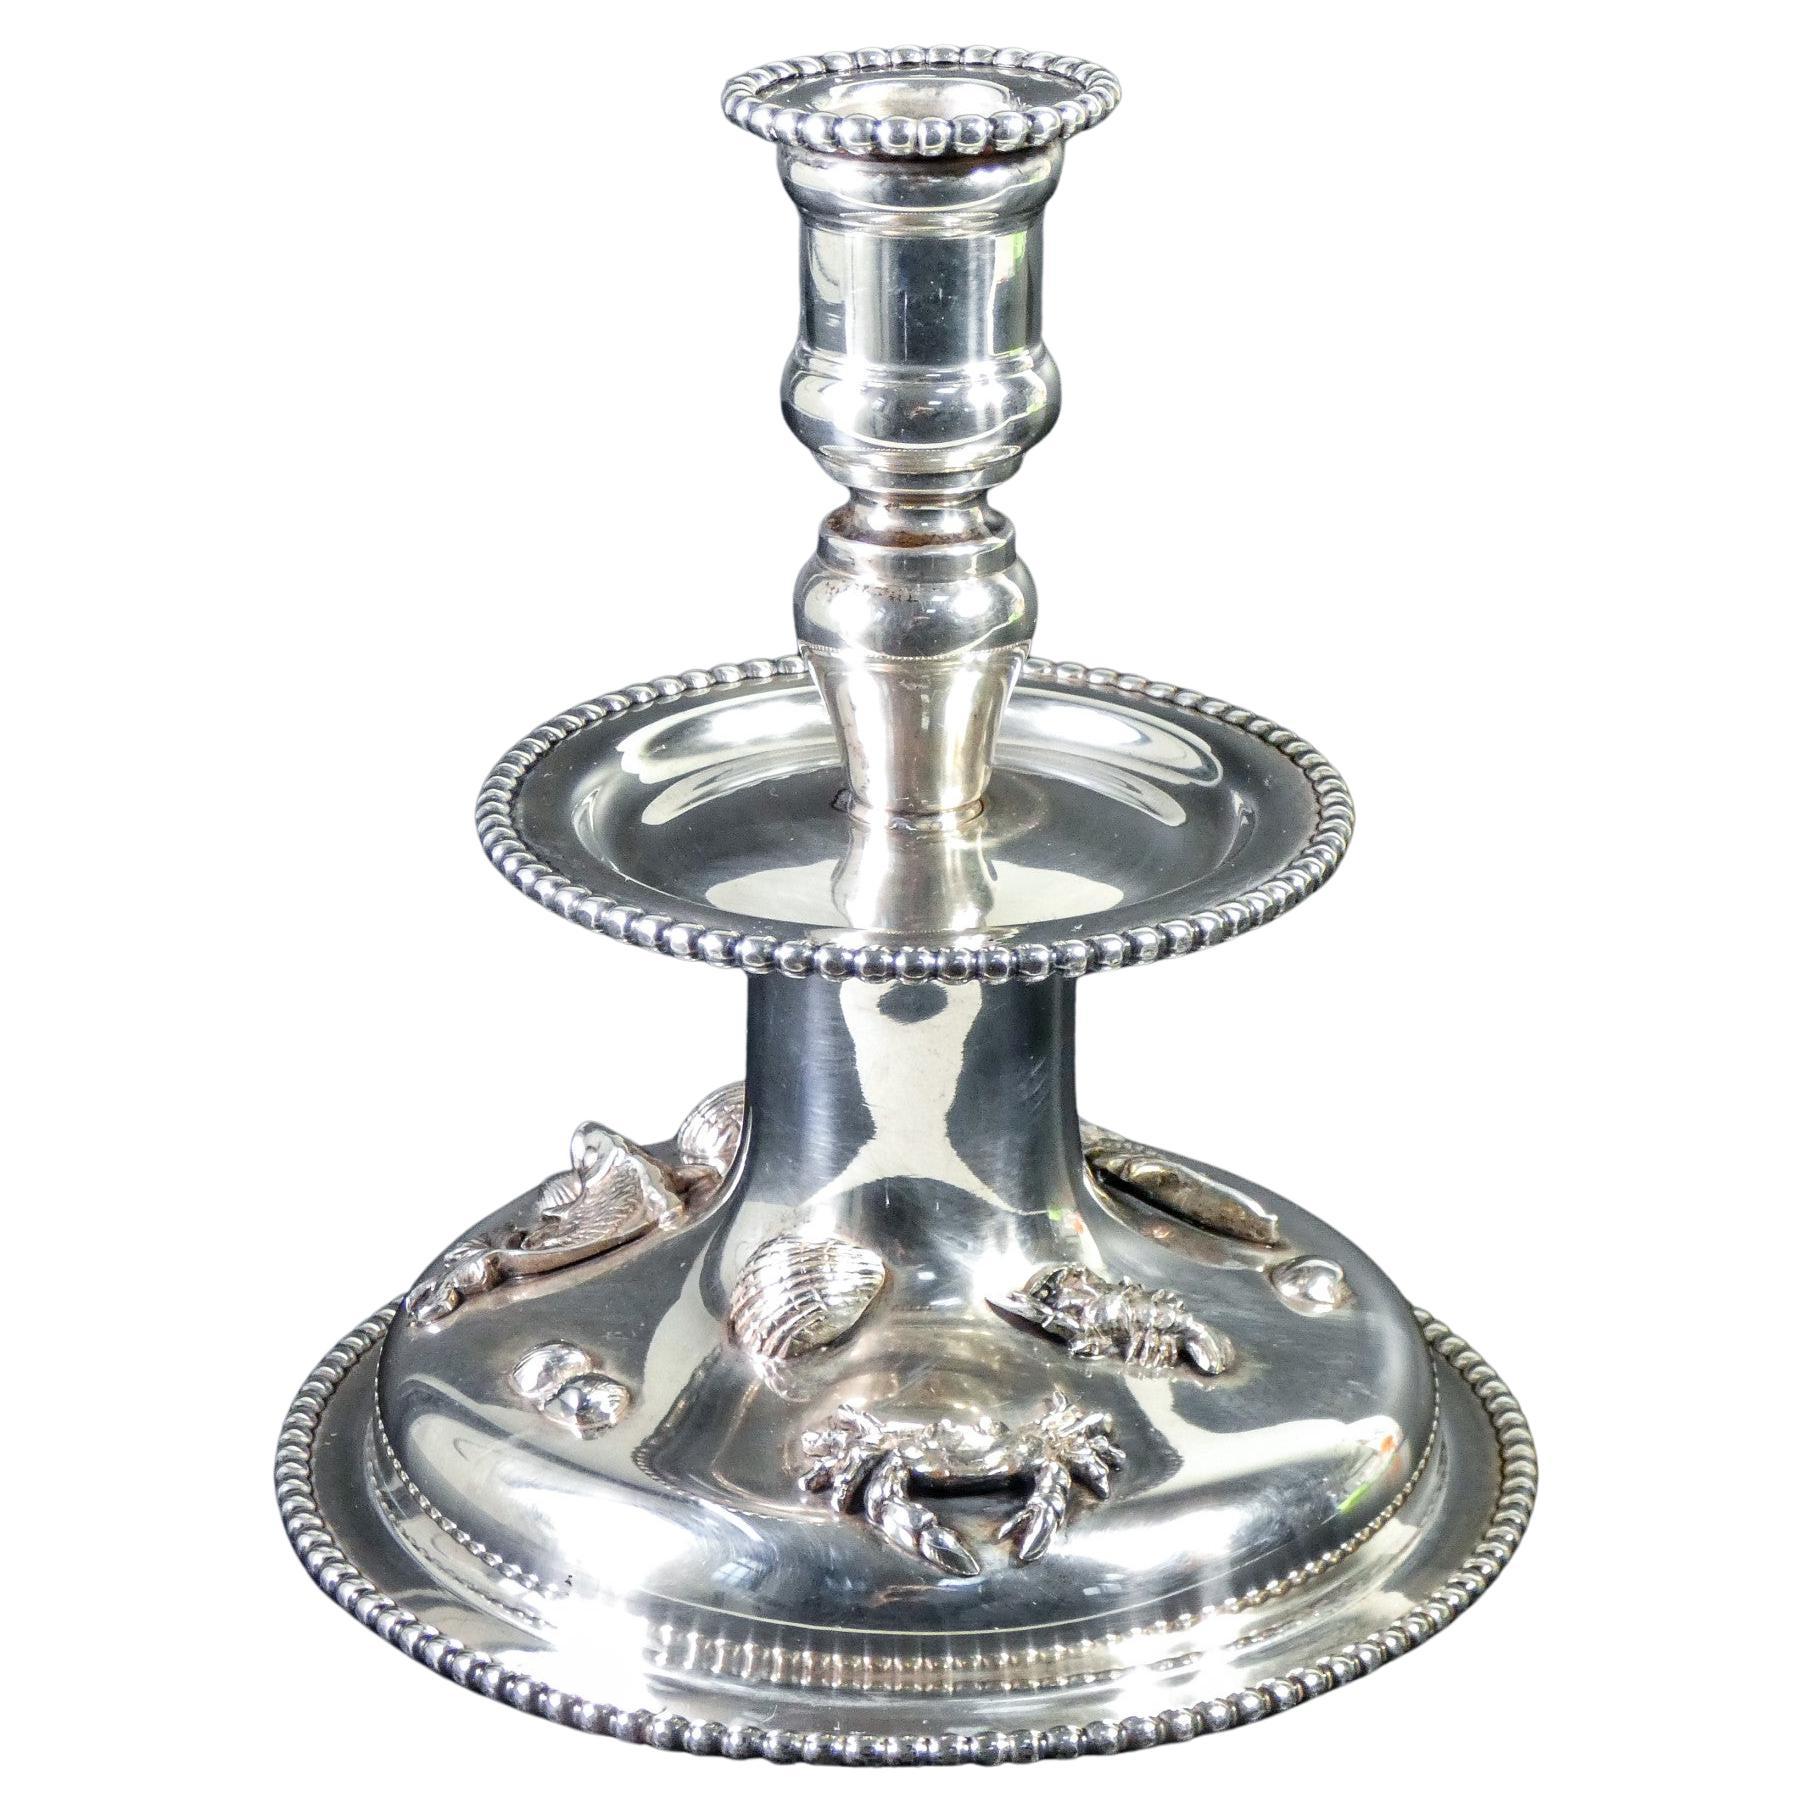 De Vecchi, Silver Candlestick with Small Sculptures of Marine Animals, Italy